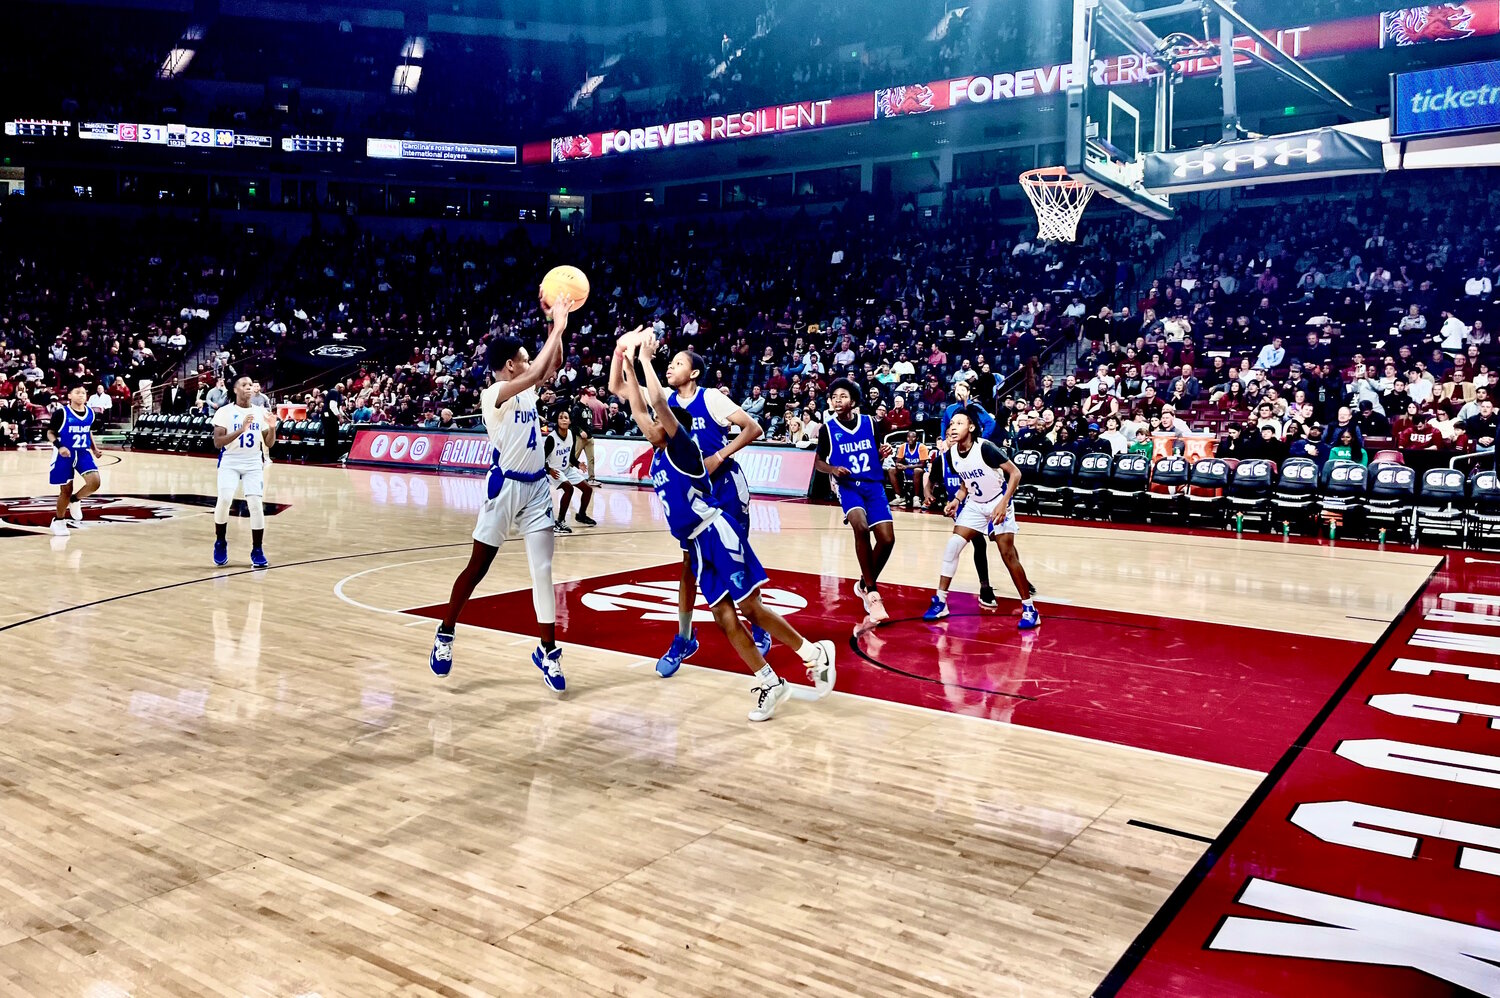 The Fulmer Middle School boys basketball team scrimmaged at halftime at Colonial Life Arena during the University of South Carolina men's team's Nov. 28 win over Notre Dame.